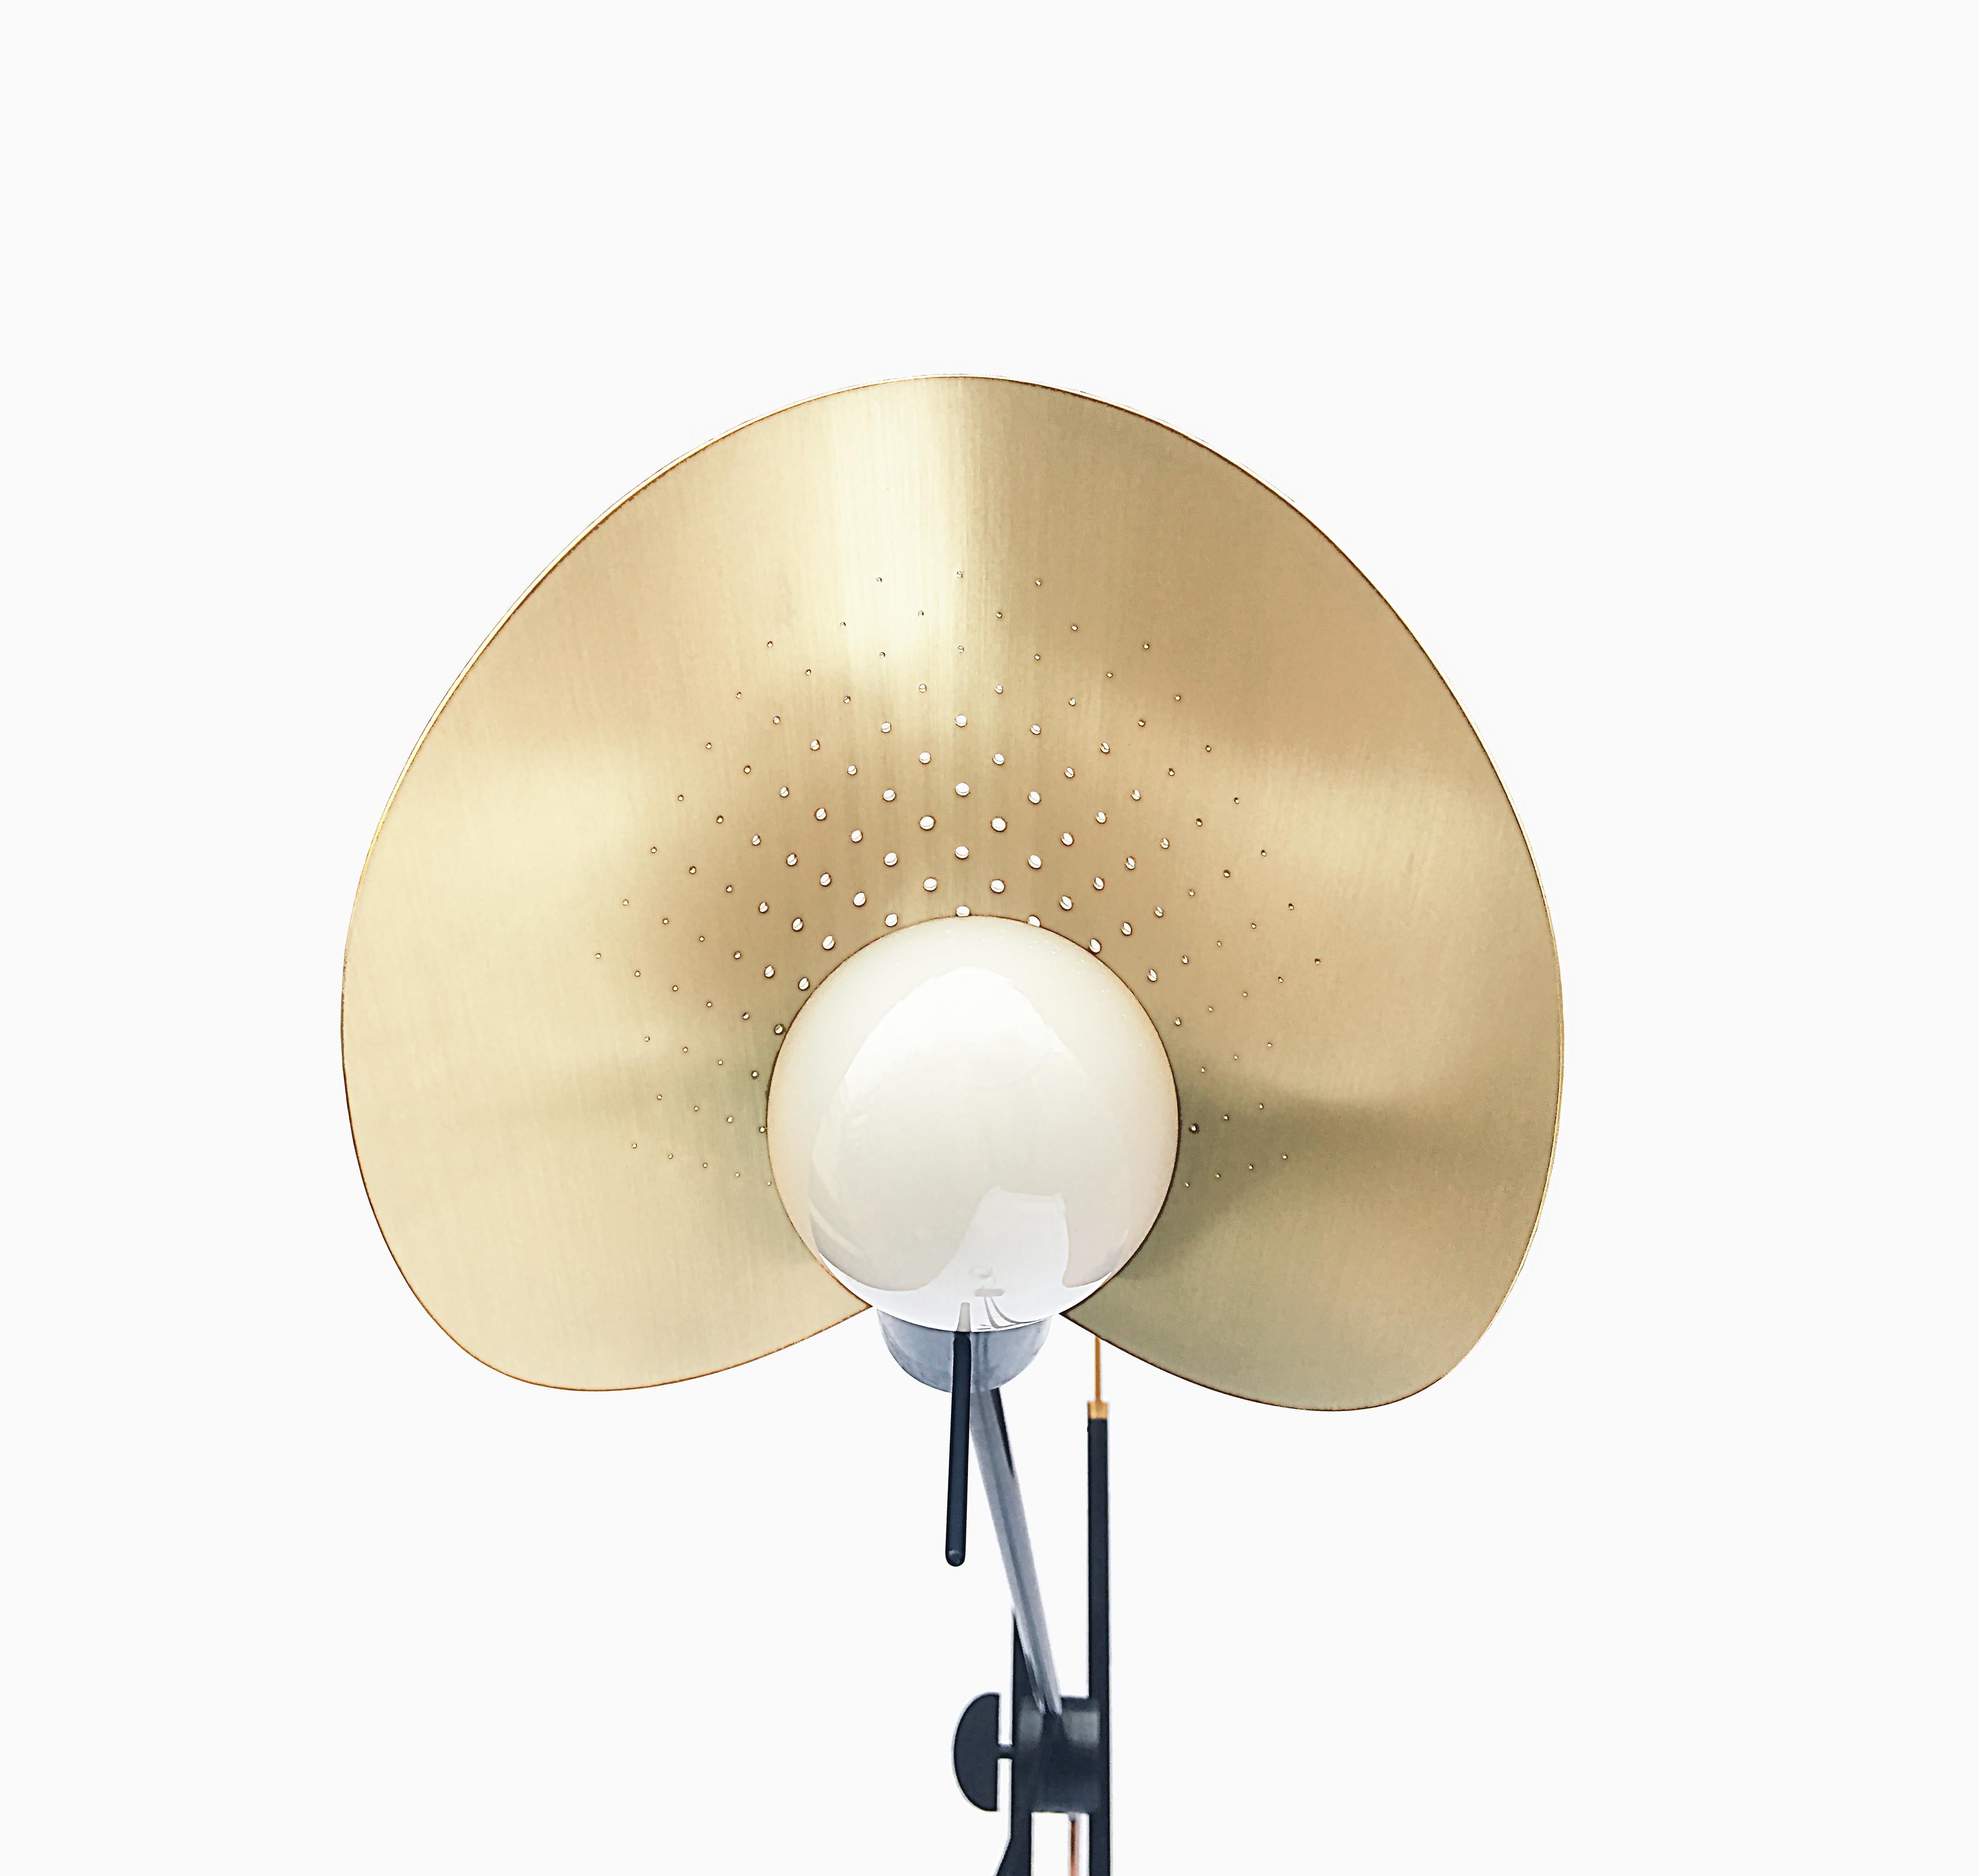 Moon floor lamp (S) by SB26
Dimensions: W 125 x D 200 x H 165 cm
Materials: Steel, copper, brass gilded with pure gold

Moon is balanced in space and refined to its worked ends which gives it bright and colorful reflections.
This reader plays